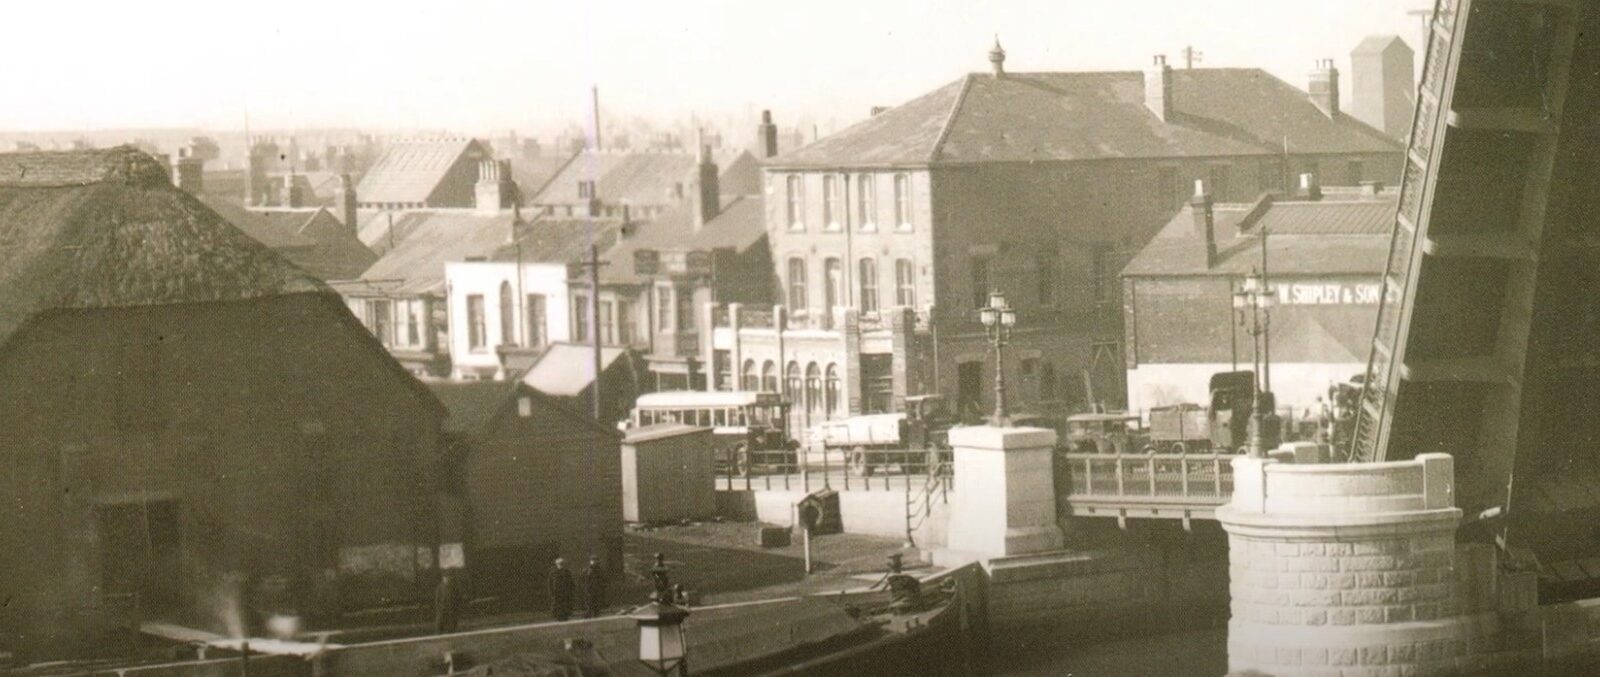 Historic image of Great Yarmouth